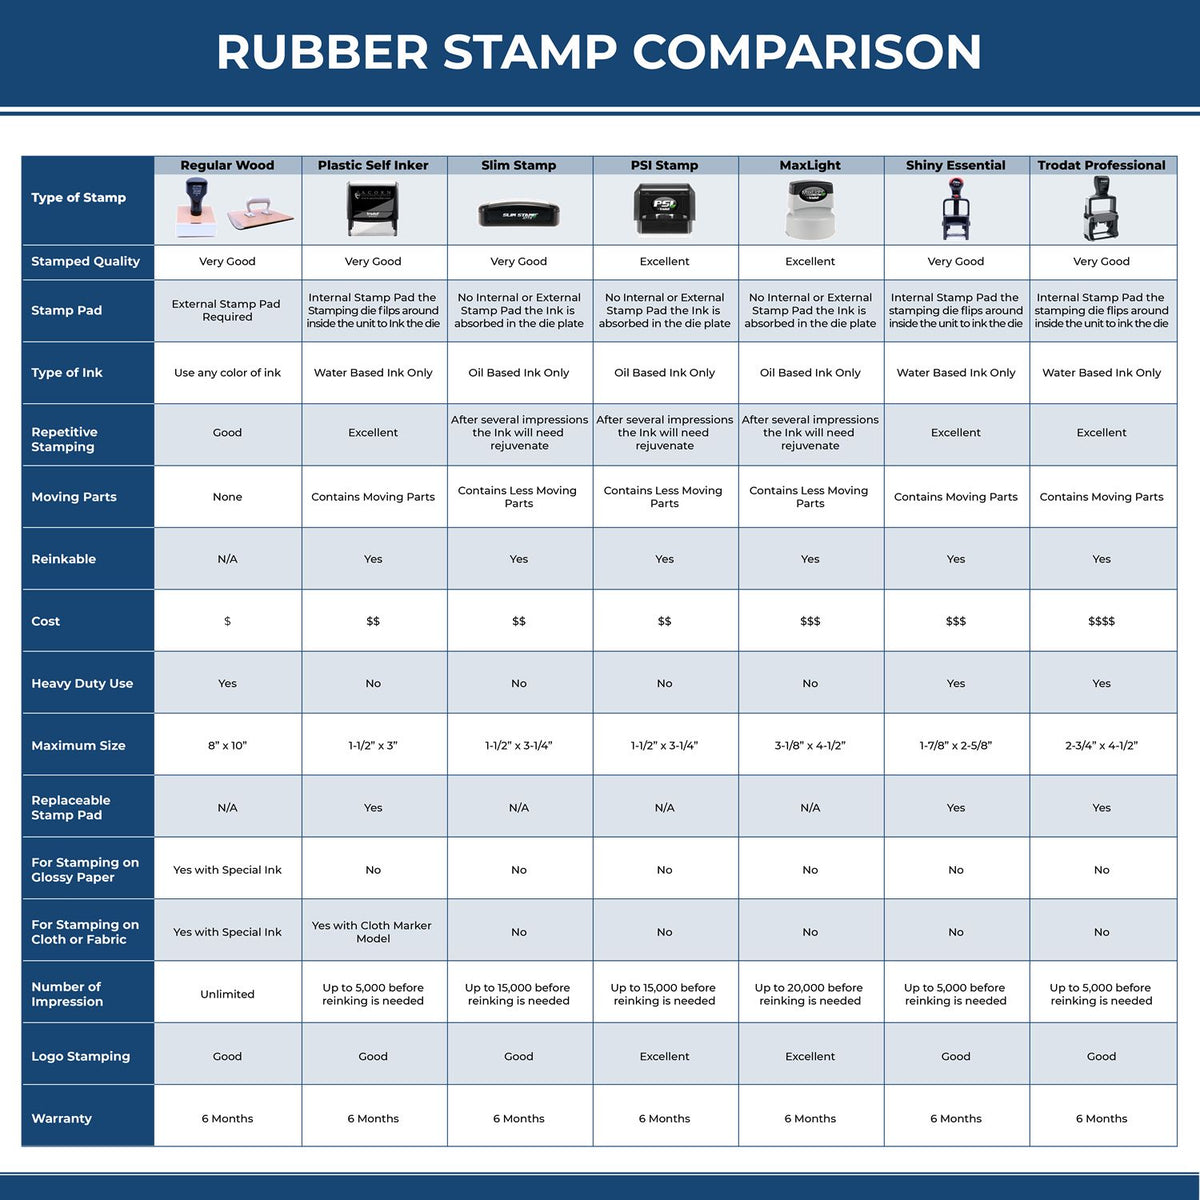 Large Self Inking Account Closed Stamp 4101S Rubber Stamp Comparison